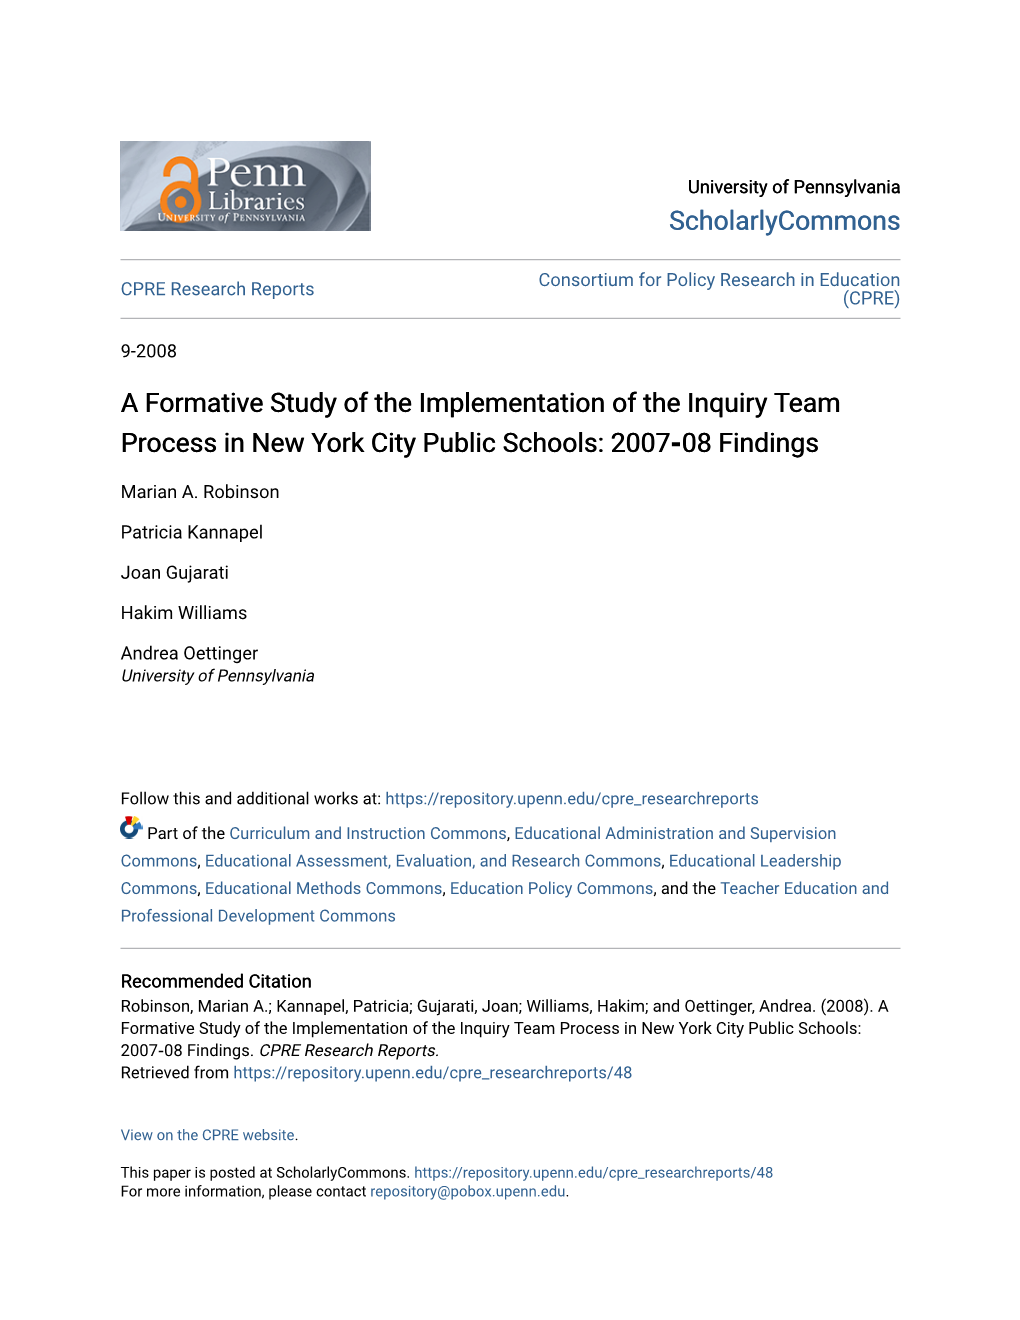 A Formative Study of the Implementation of the Inquiry Team Process in New York City Public Schools: 2007‐08 Findings